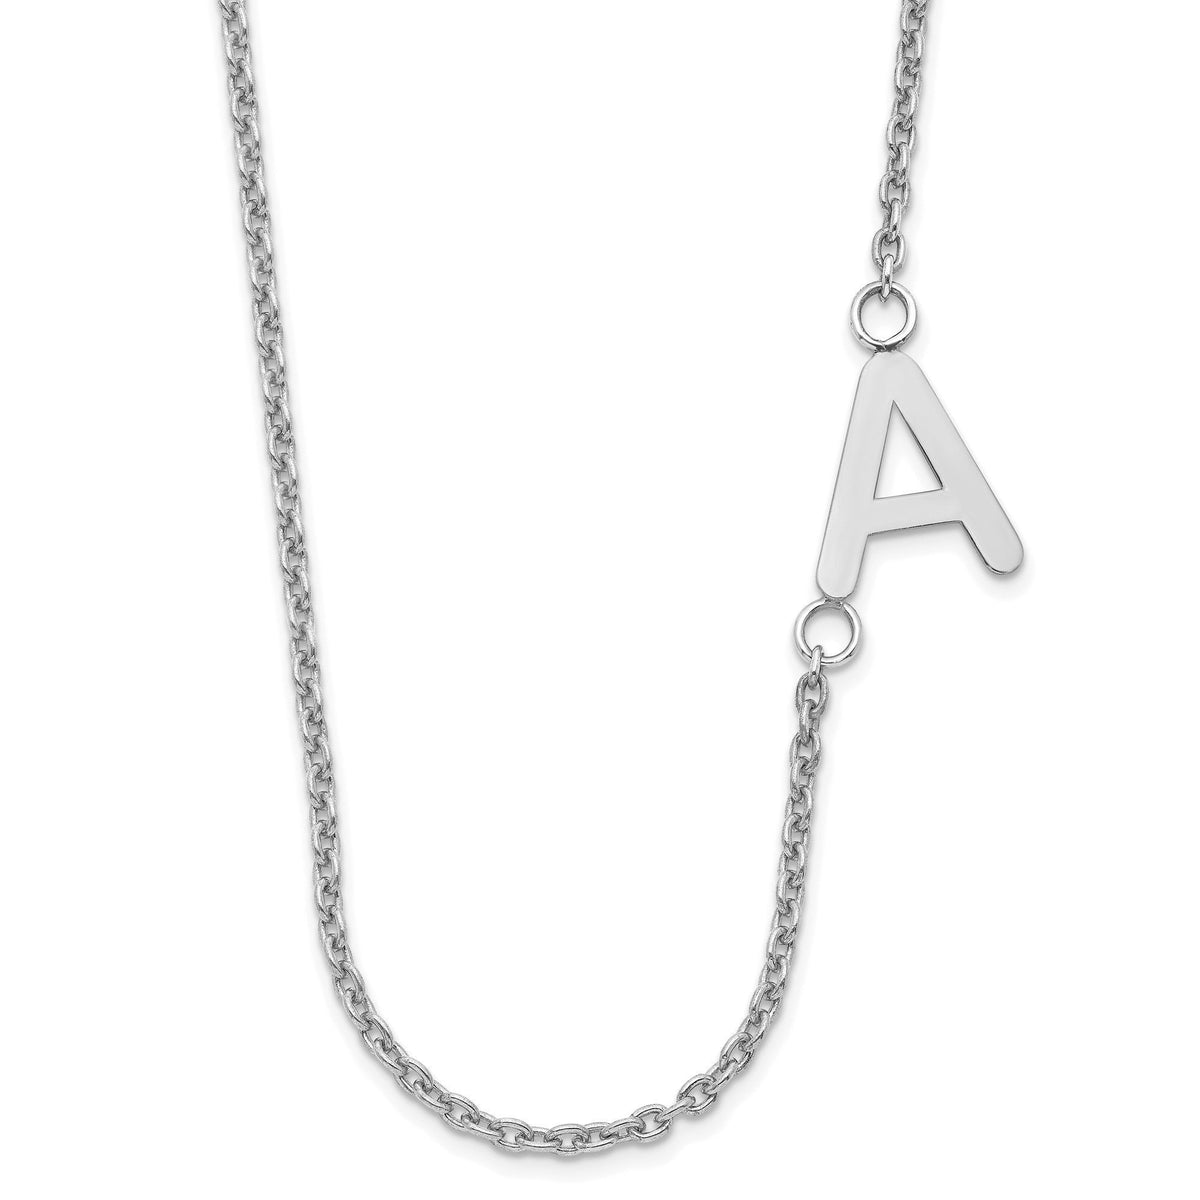 Offset Initial Necklace with Bold Letter Sterling Silver & 10k and 14k Yellow White and Rose Gold Gift Box Included